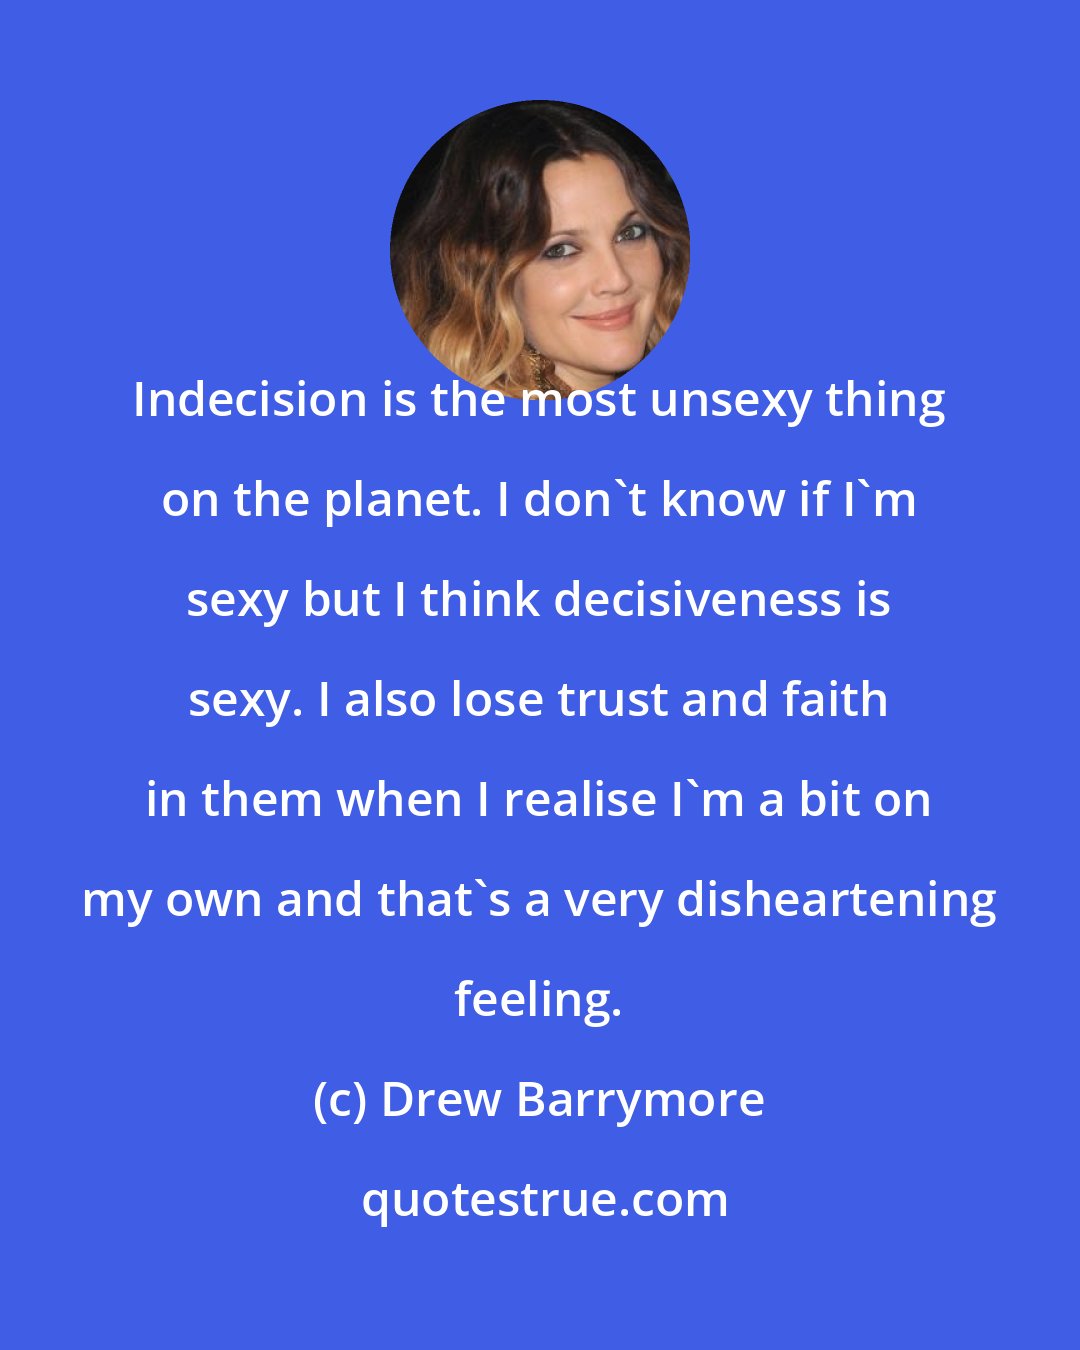 Drew Barrymore: Indecision is the most unsexy thing on the planet. I don't know if I'm sexy but I think decisiveness is sexy. I also lose trust and faith in them when I realise I'm a bit on my own and that's a very disheartening feeling.